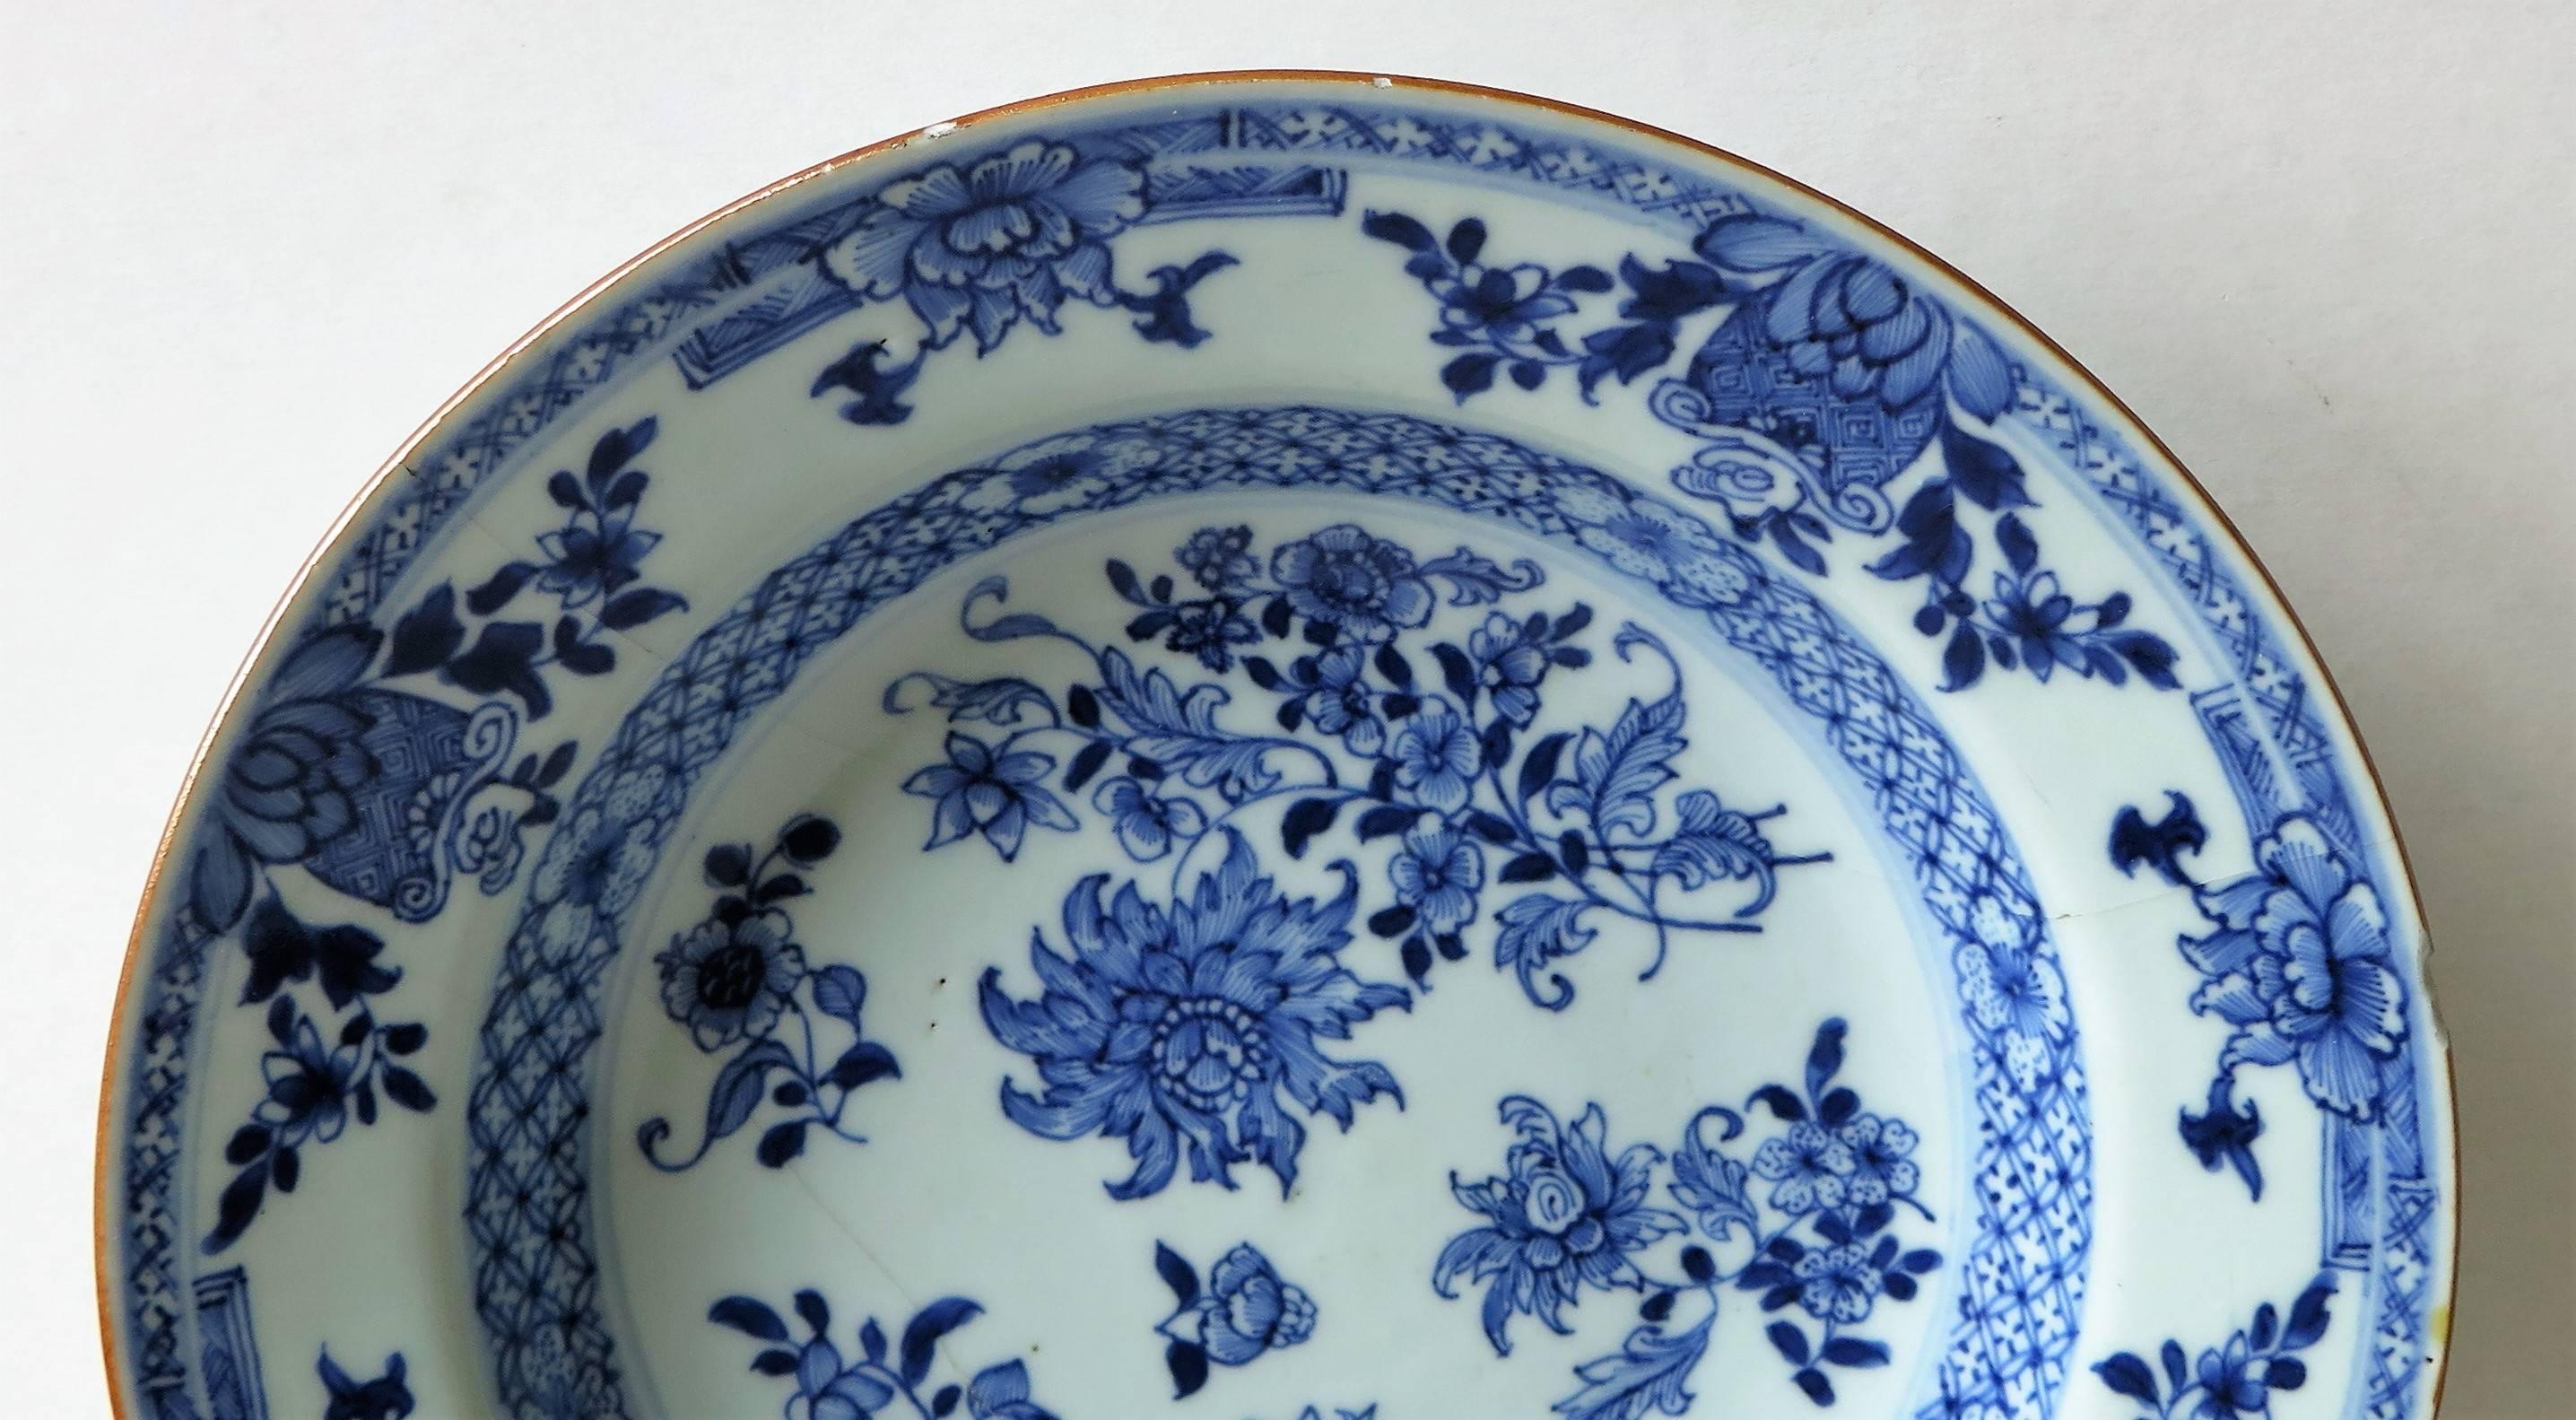 Hand-Painted Chinese Porcelain Plate or Bowl, Blue and White, Floral Sprigs, circa 1770